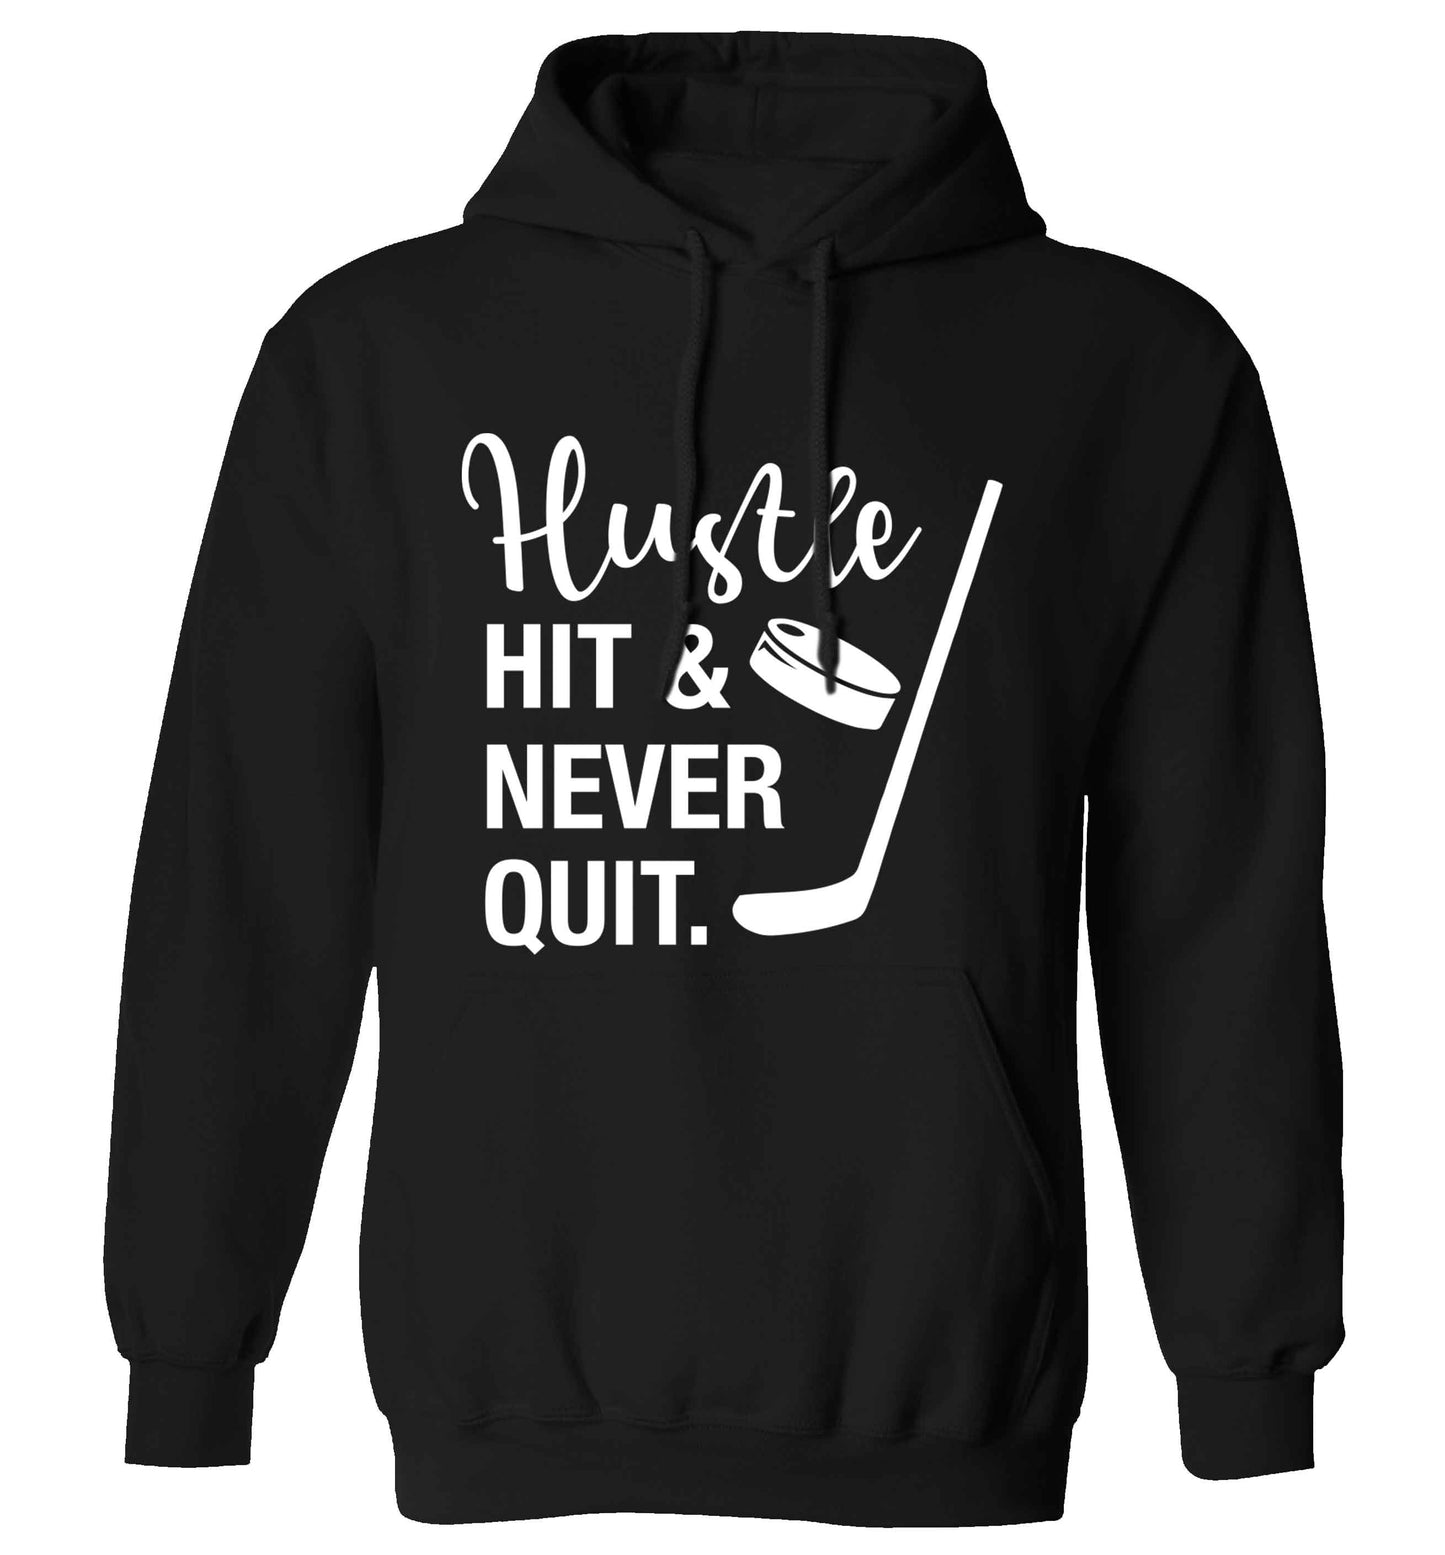 Hustle hit and never quit adults unisex black hoodie 2XL